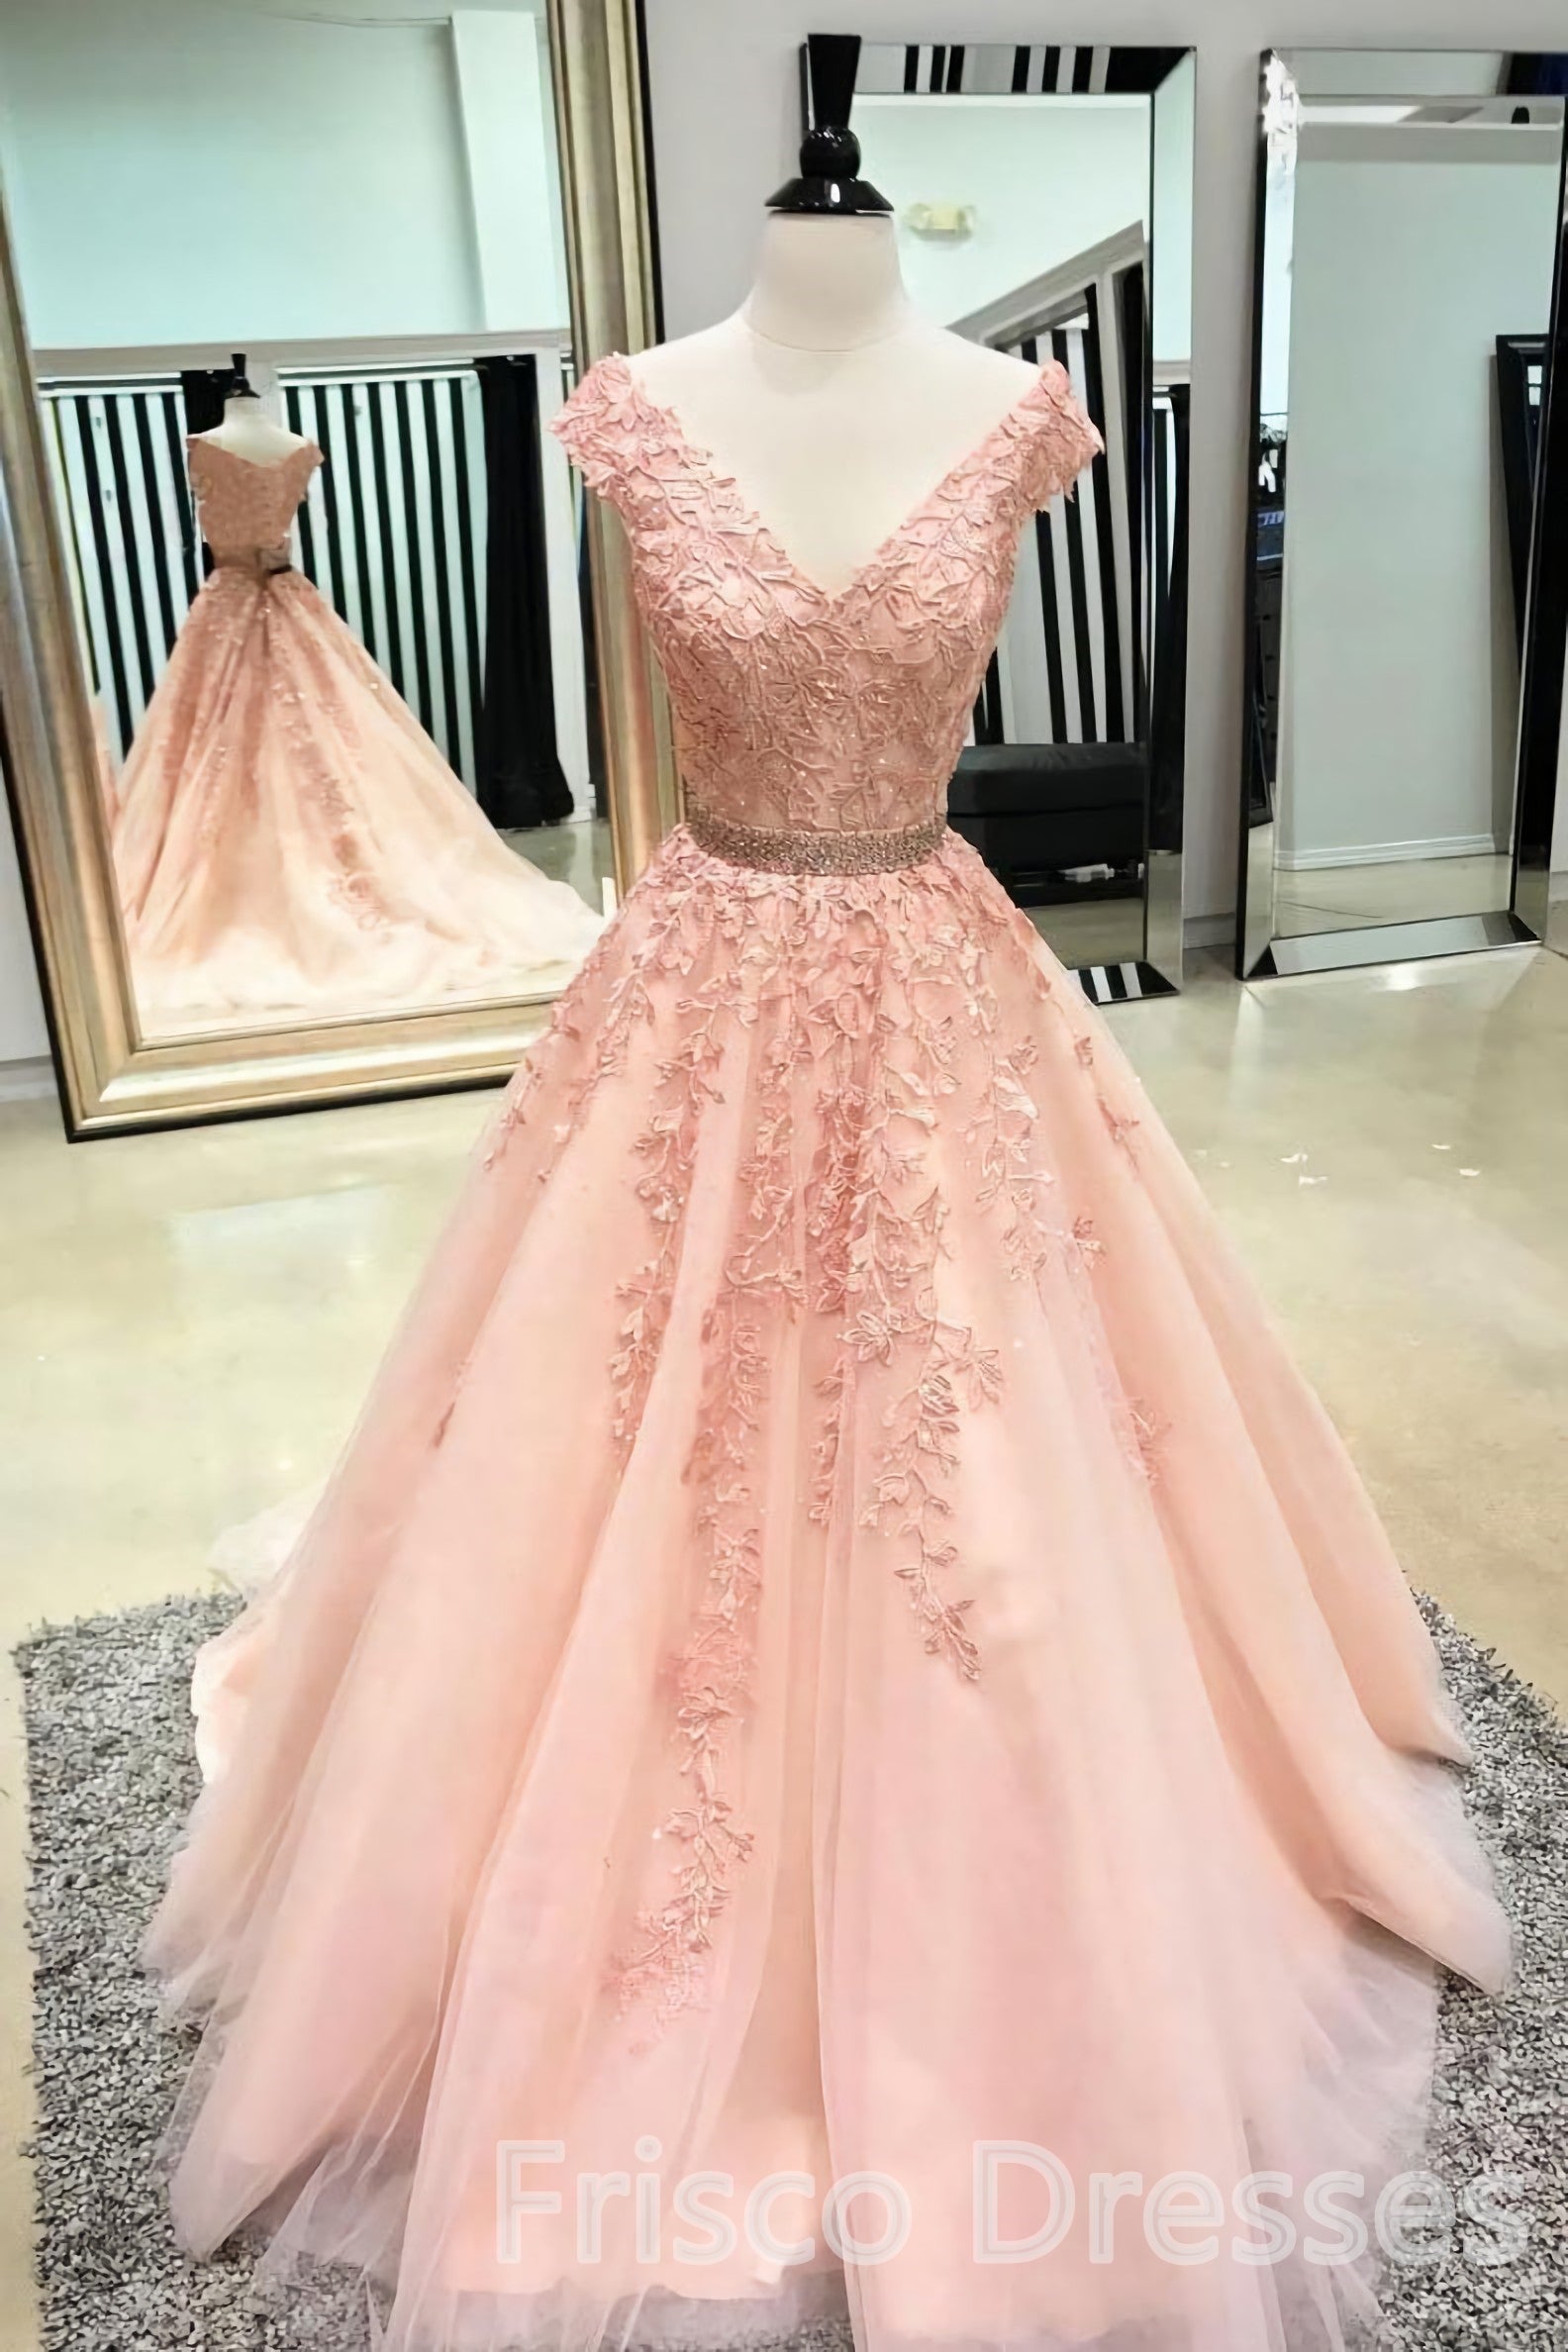 Pink Sleeveless V Neck Tulle Lace Applique Long Corset Prom Dresses outfit, Party Dresses Store